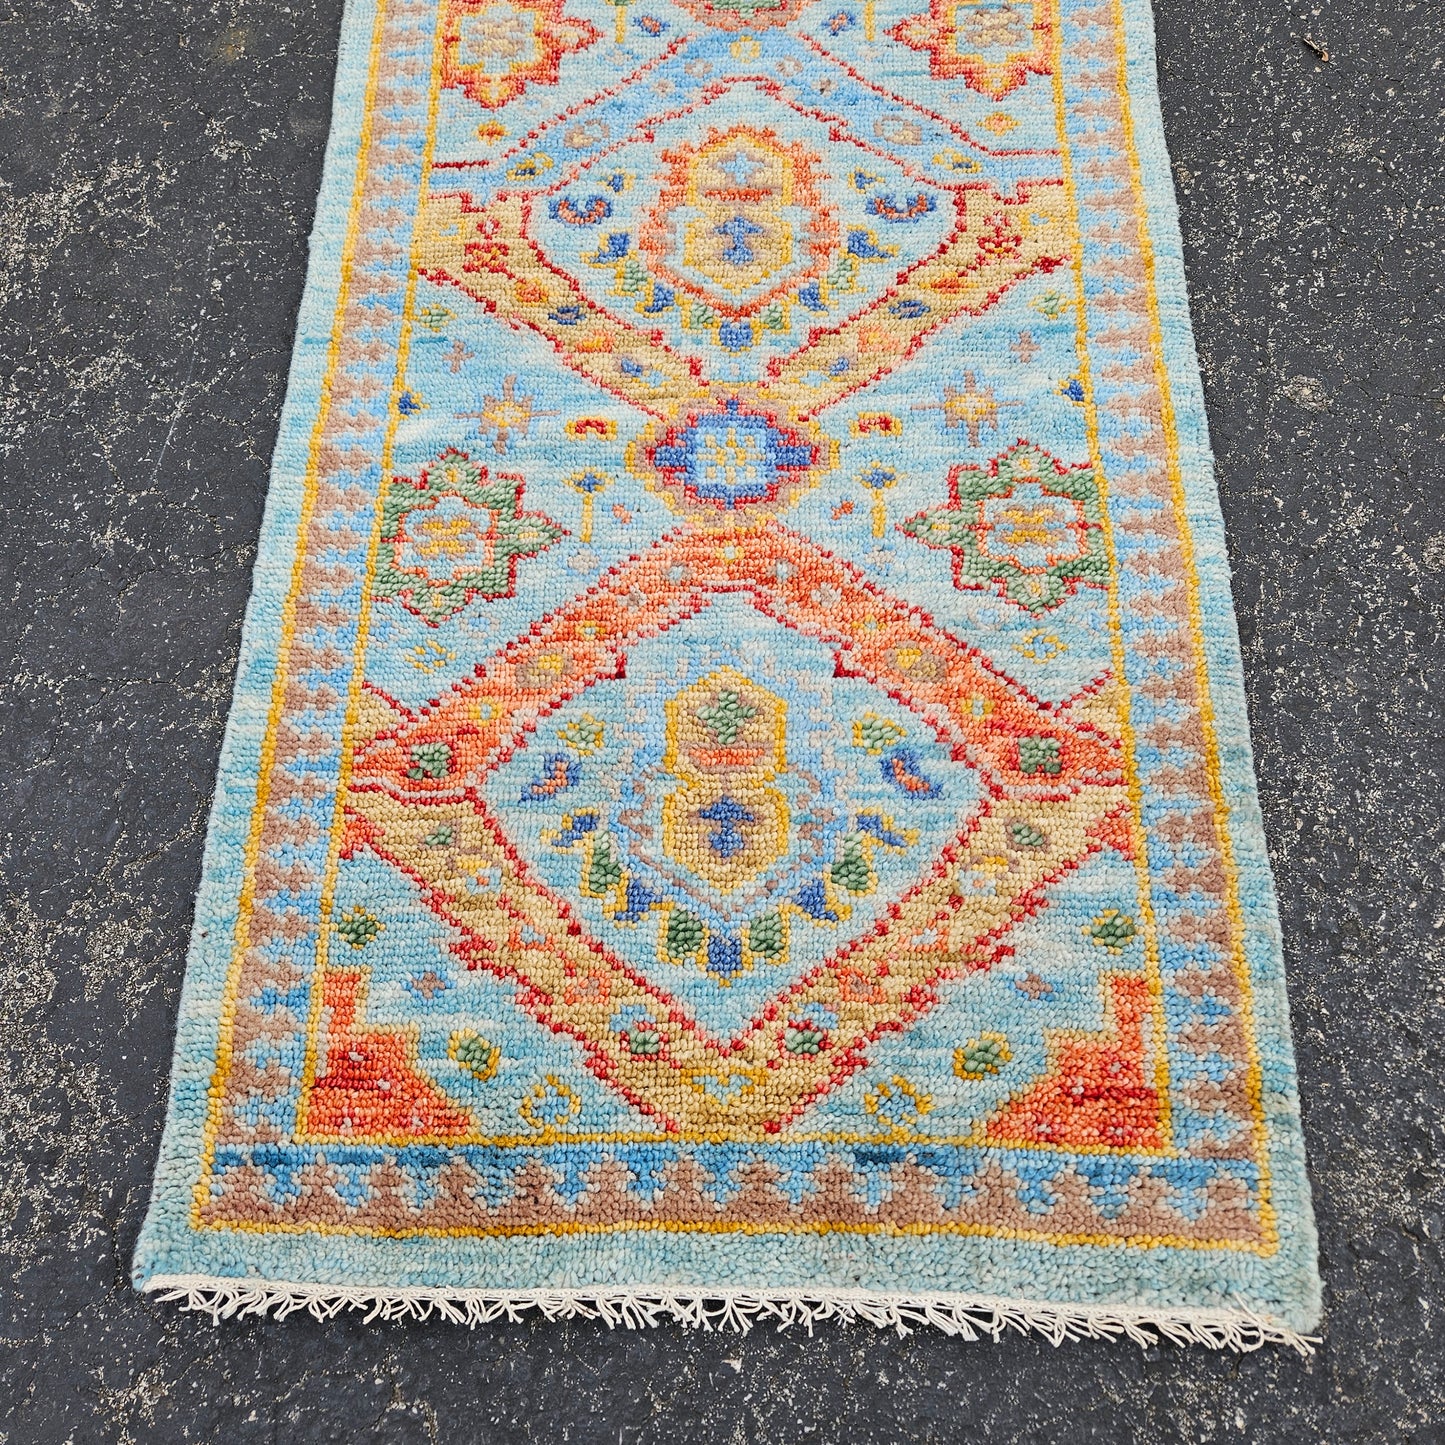 100% Wool Hand Knotted Beautiful Multi Colored Runner Rug / Carpet- 2' 6" x 8'